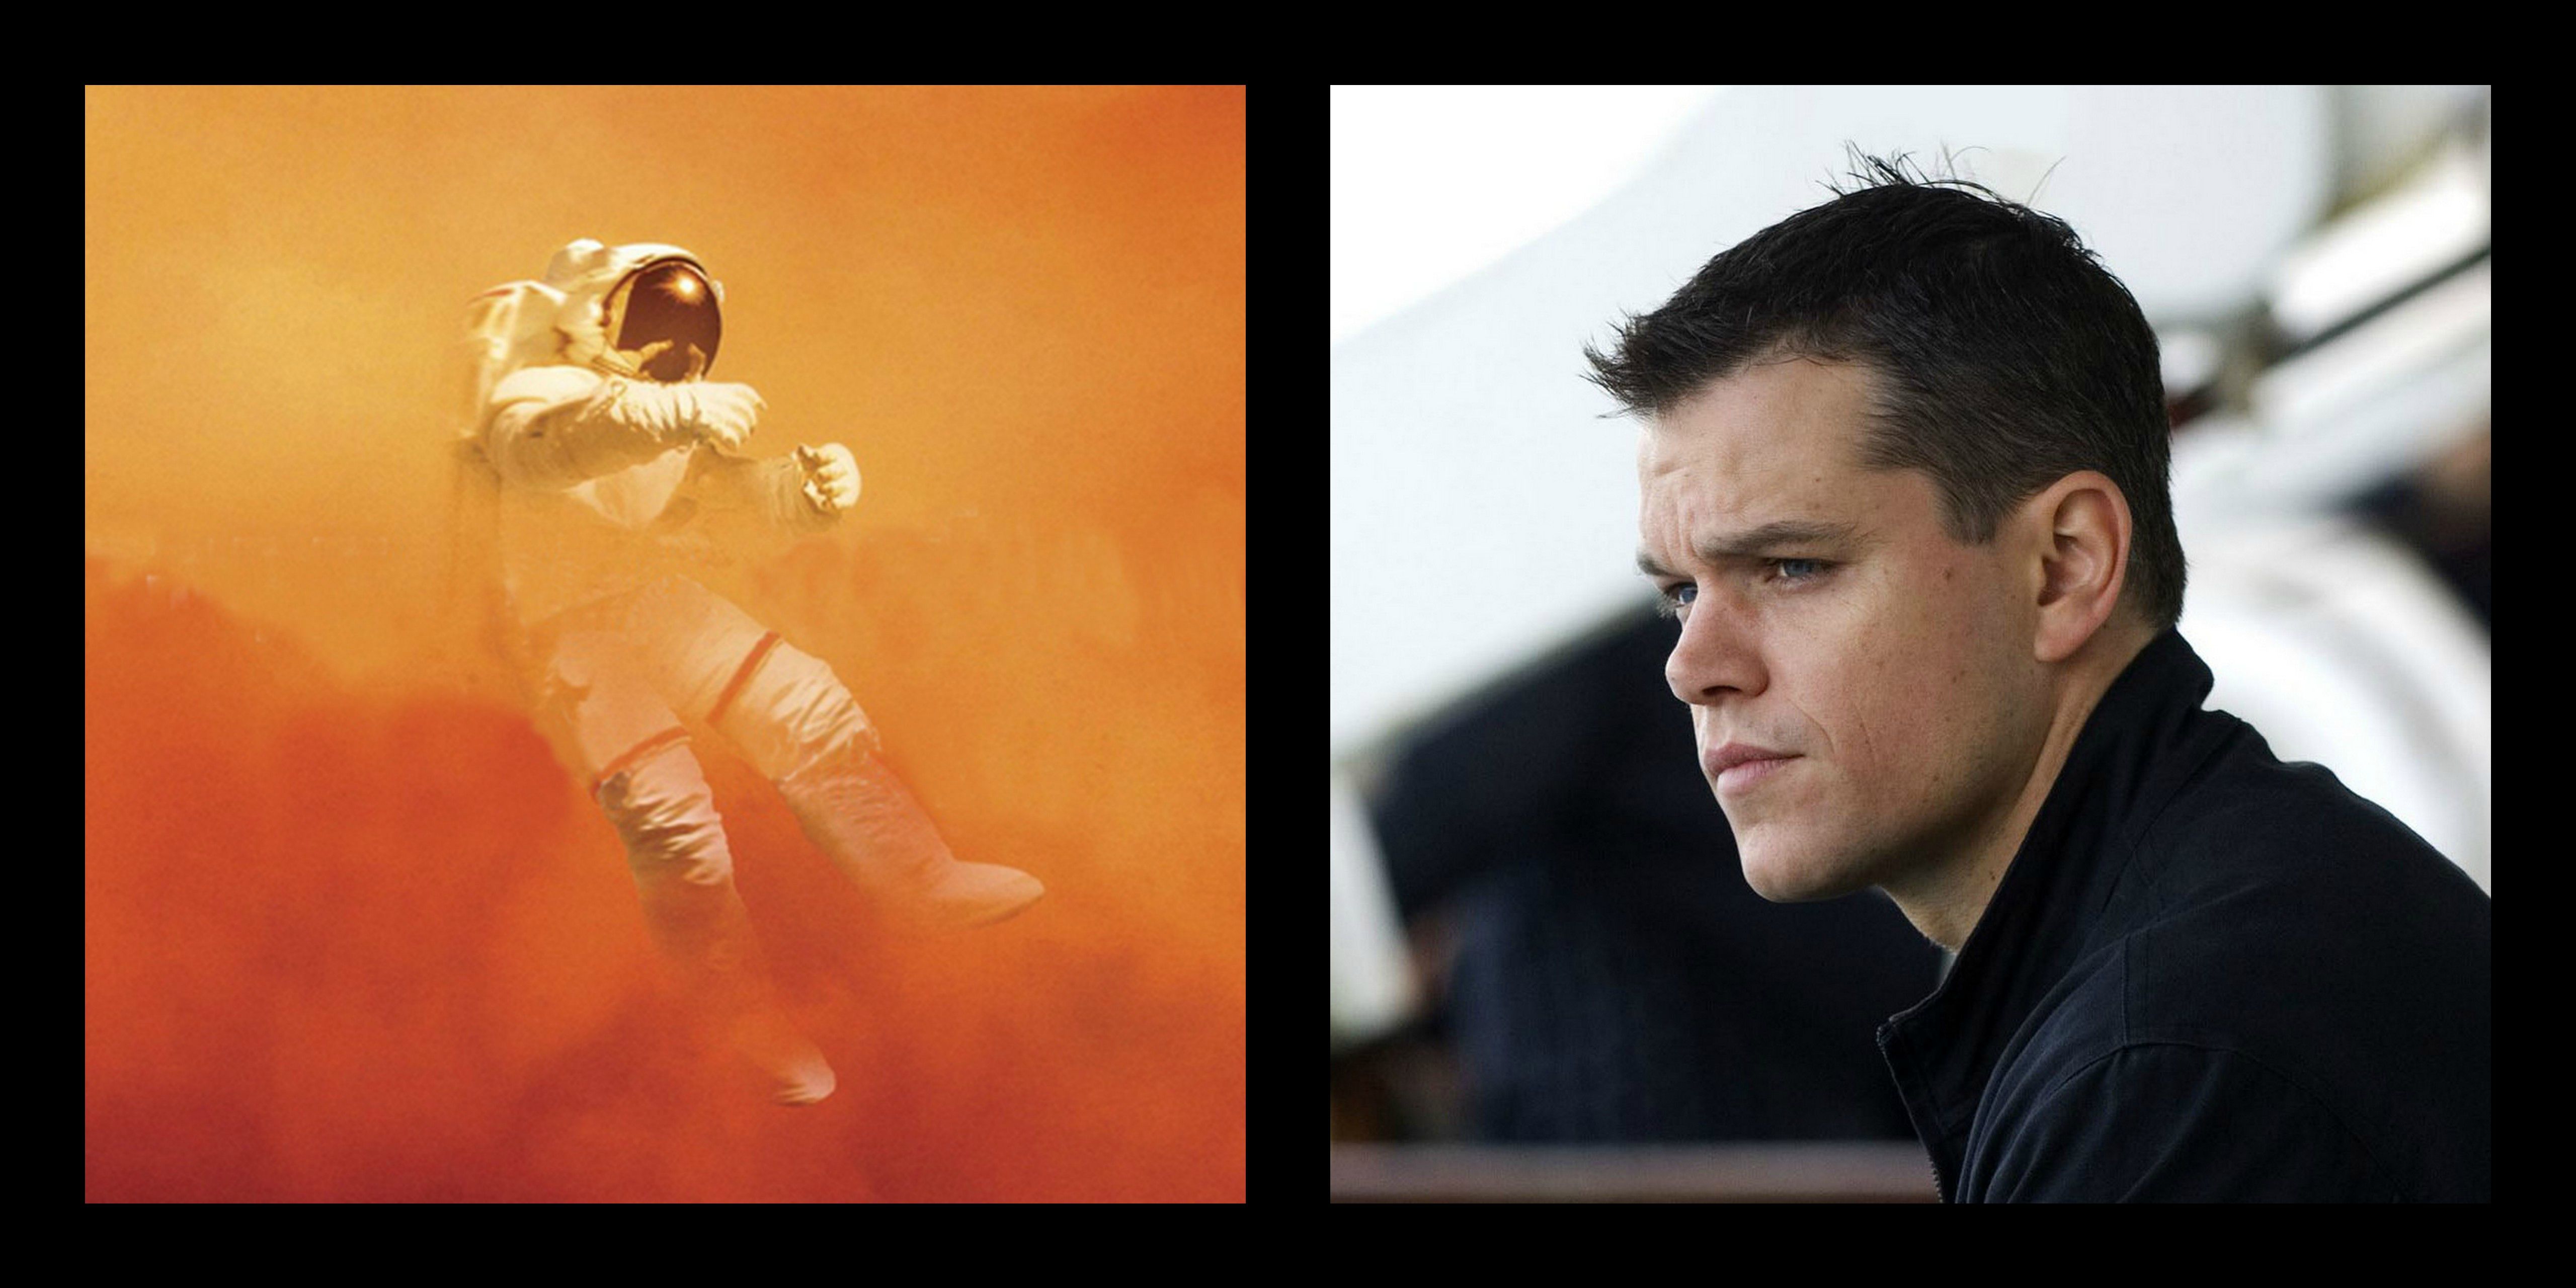 " The Martian"- Based on "The Martian" by Andy Weir, this movie will follow Mark Watney Matt Damon as he becomes stranded alone on Mars and must improvise in order to survive. It's "Apollo 13" meets "Cast Away". Release date: November 25th